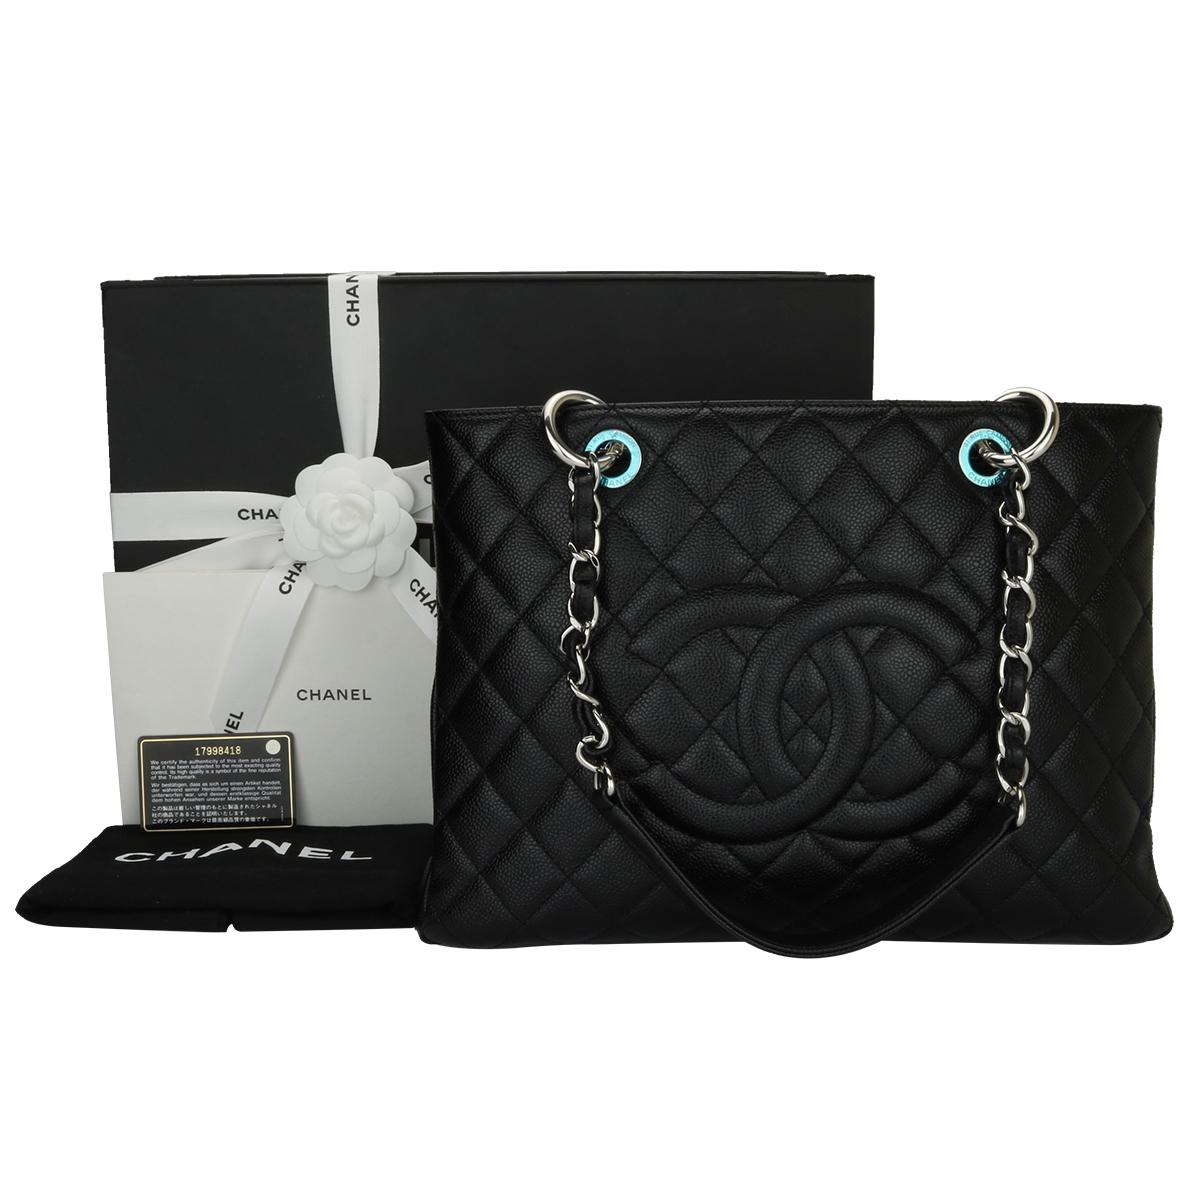 Authentic CHANEL Grand Shopping Tote (GST) Black Caviar with Silver Hardware 2013.

This bag is in mint condition, the bag still holds its shape very well, and the hardware is still shiny.

Exterior Condition: Mint condition, corners show no visible